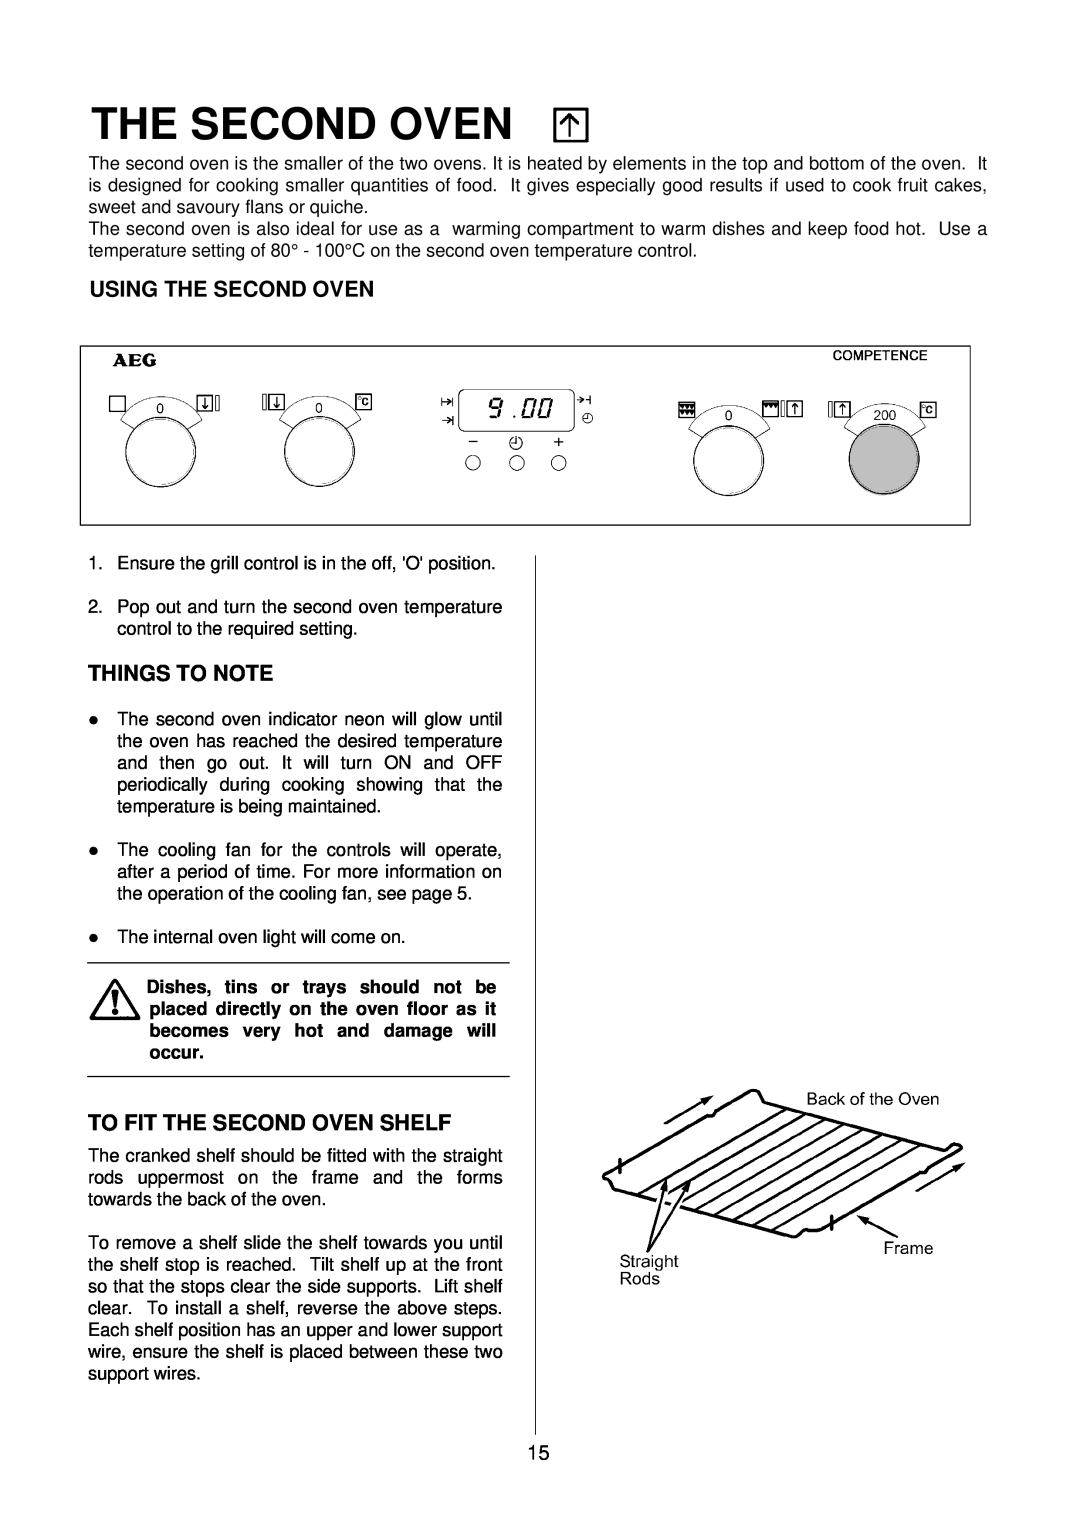 Electrolux D4100-1 operating instructions Using The Second Oven, To Fit The Second Oven Shelf, Things To Note 